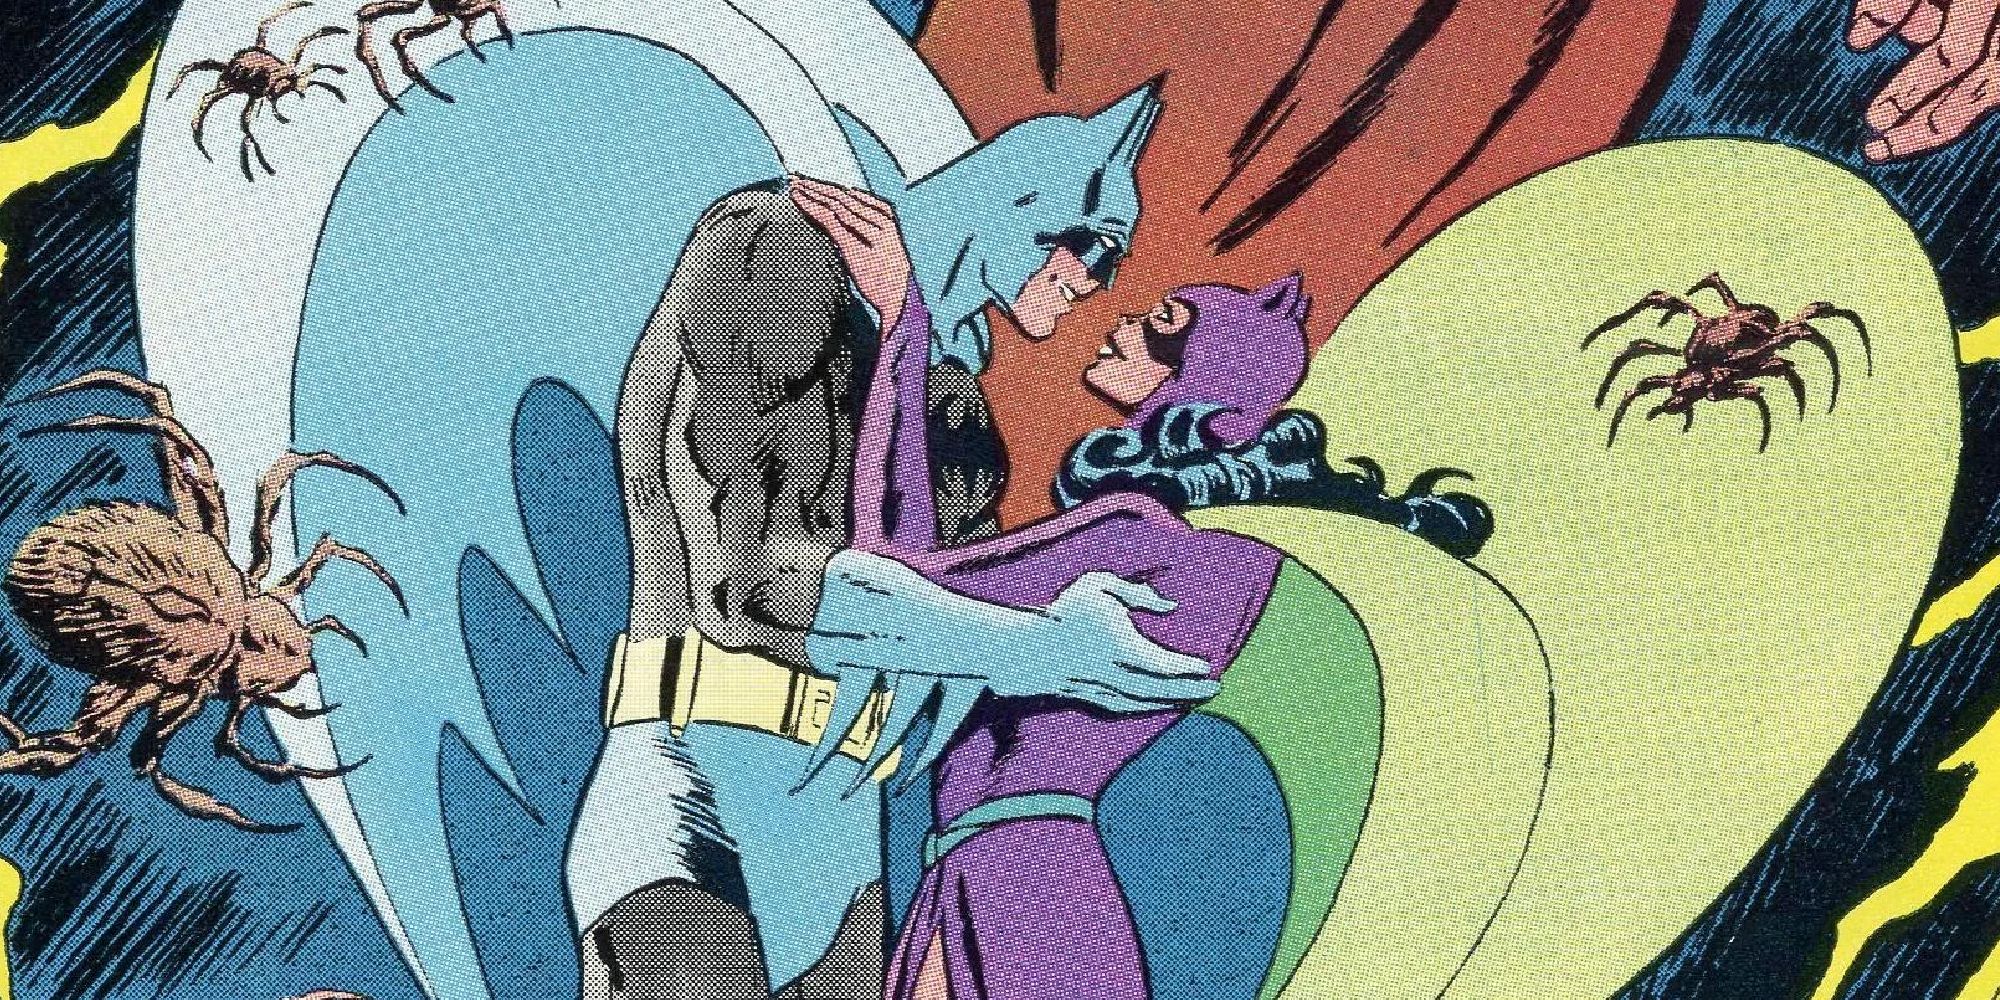 Batman and Catwoman embracing on the cover of The Autobiography of Bruce Wayne